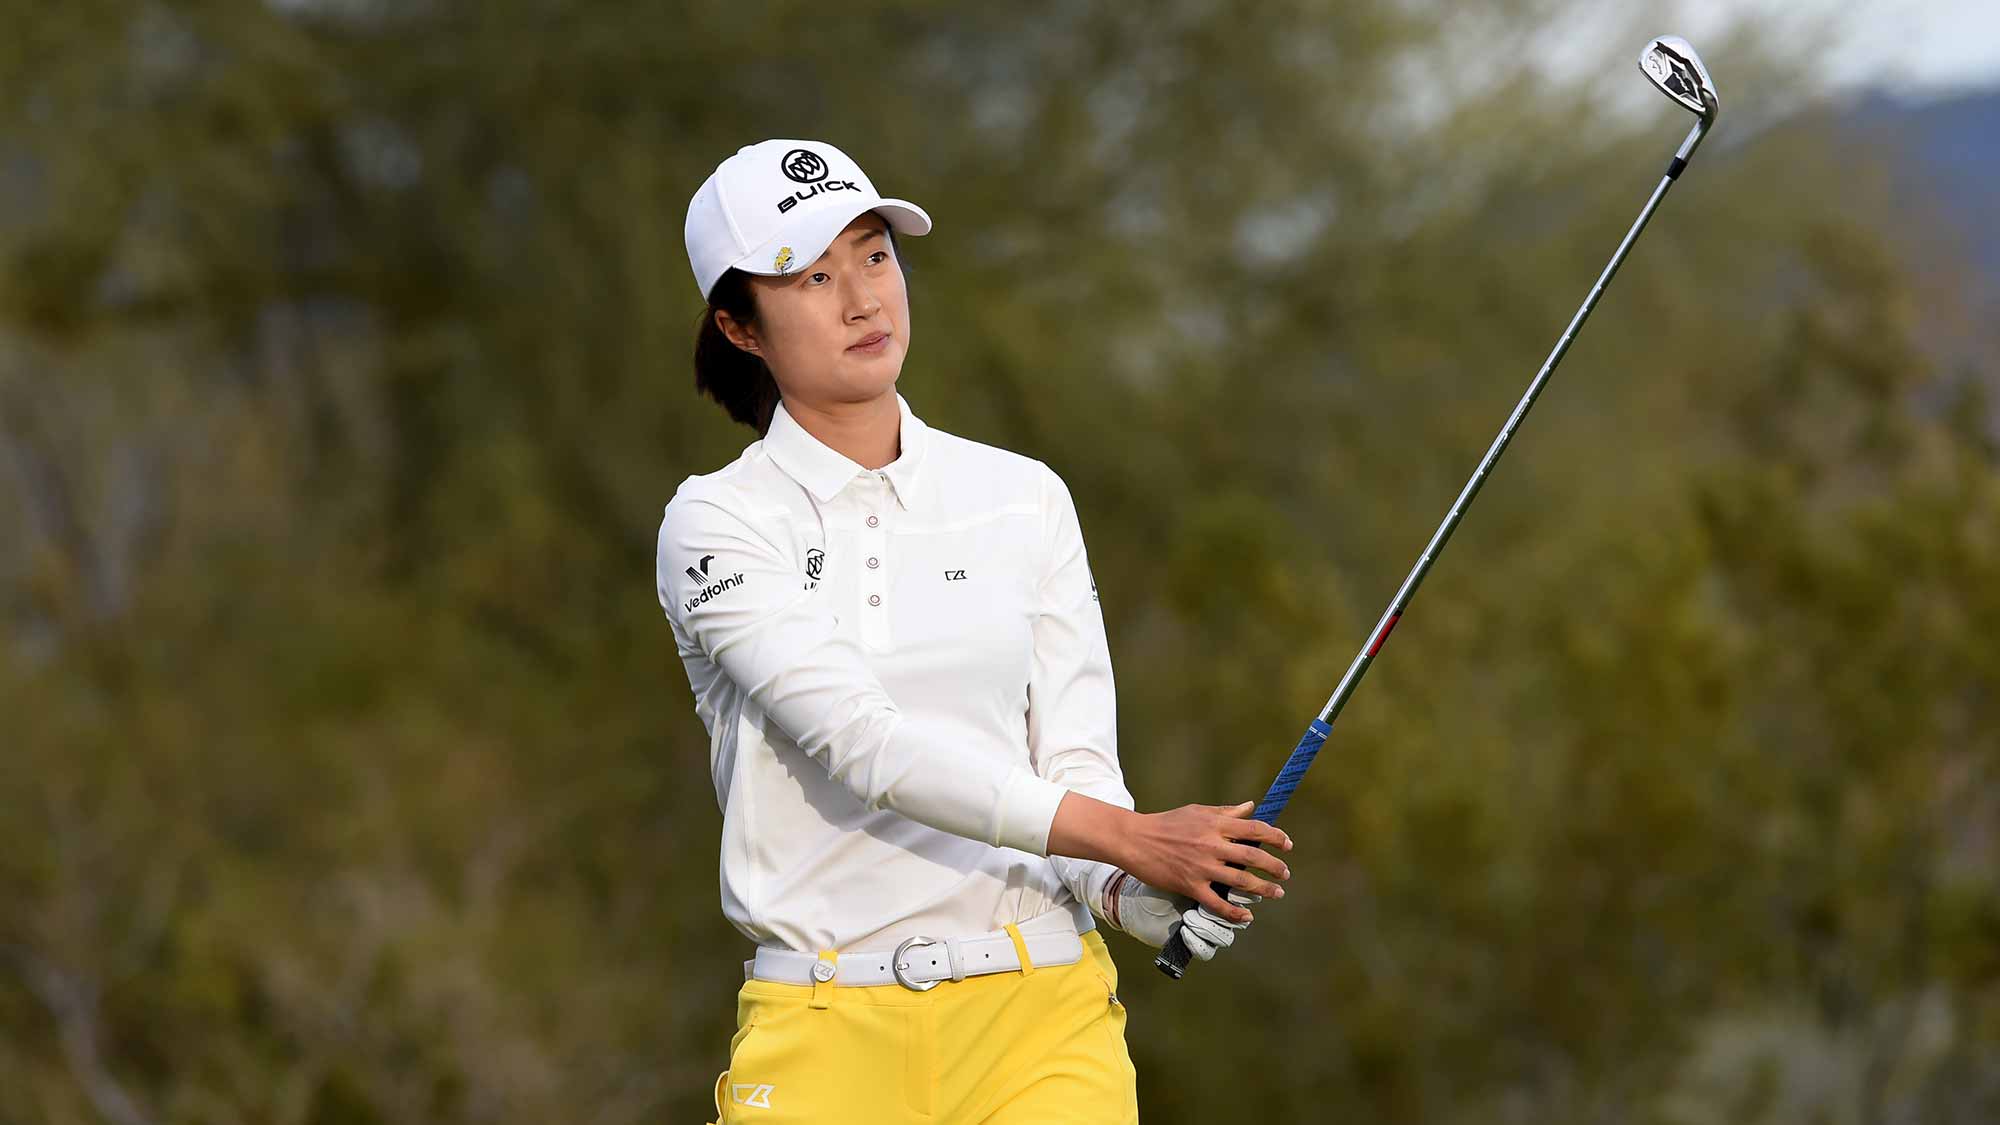 Yu Liu of China hits her tee shot on the 17th hole during the third round of the Bank Of Hope Founders Cup at the Wildfire Golf Club on March 23, 2019 in Phoenix, Arizona